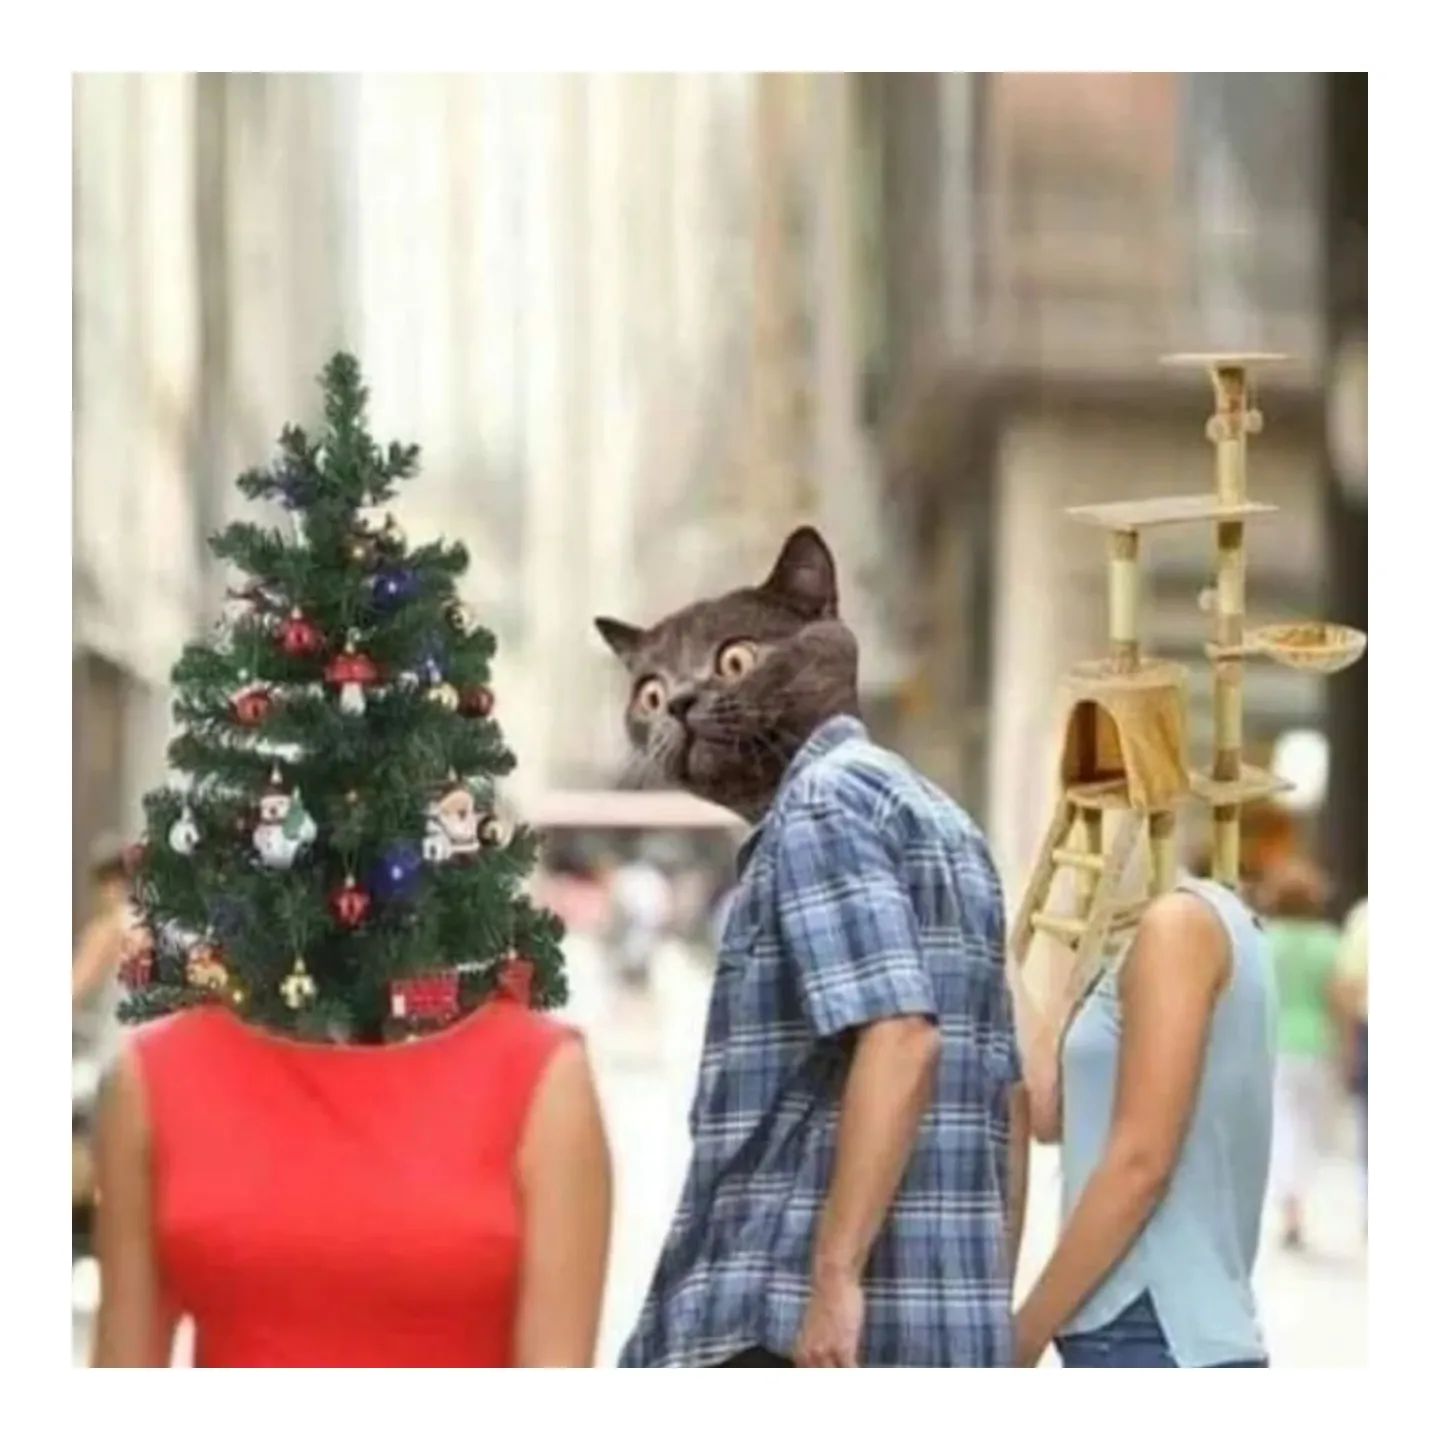 Distracted Boyfriend meme, except instead of humans it's a cat ignoring his cat tree and eyeing the Christmas tree instead.